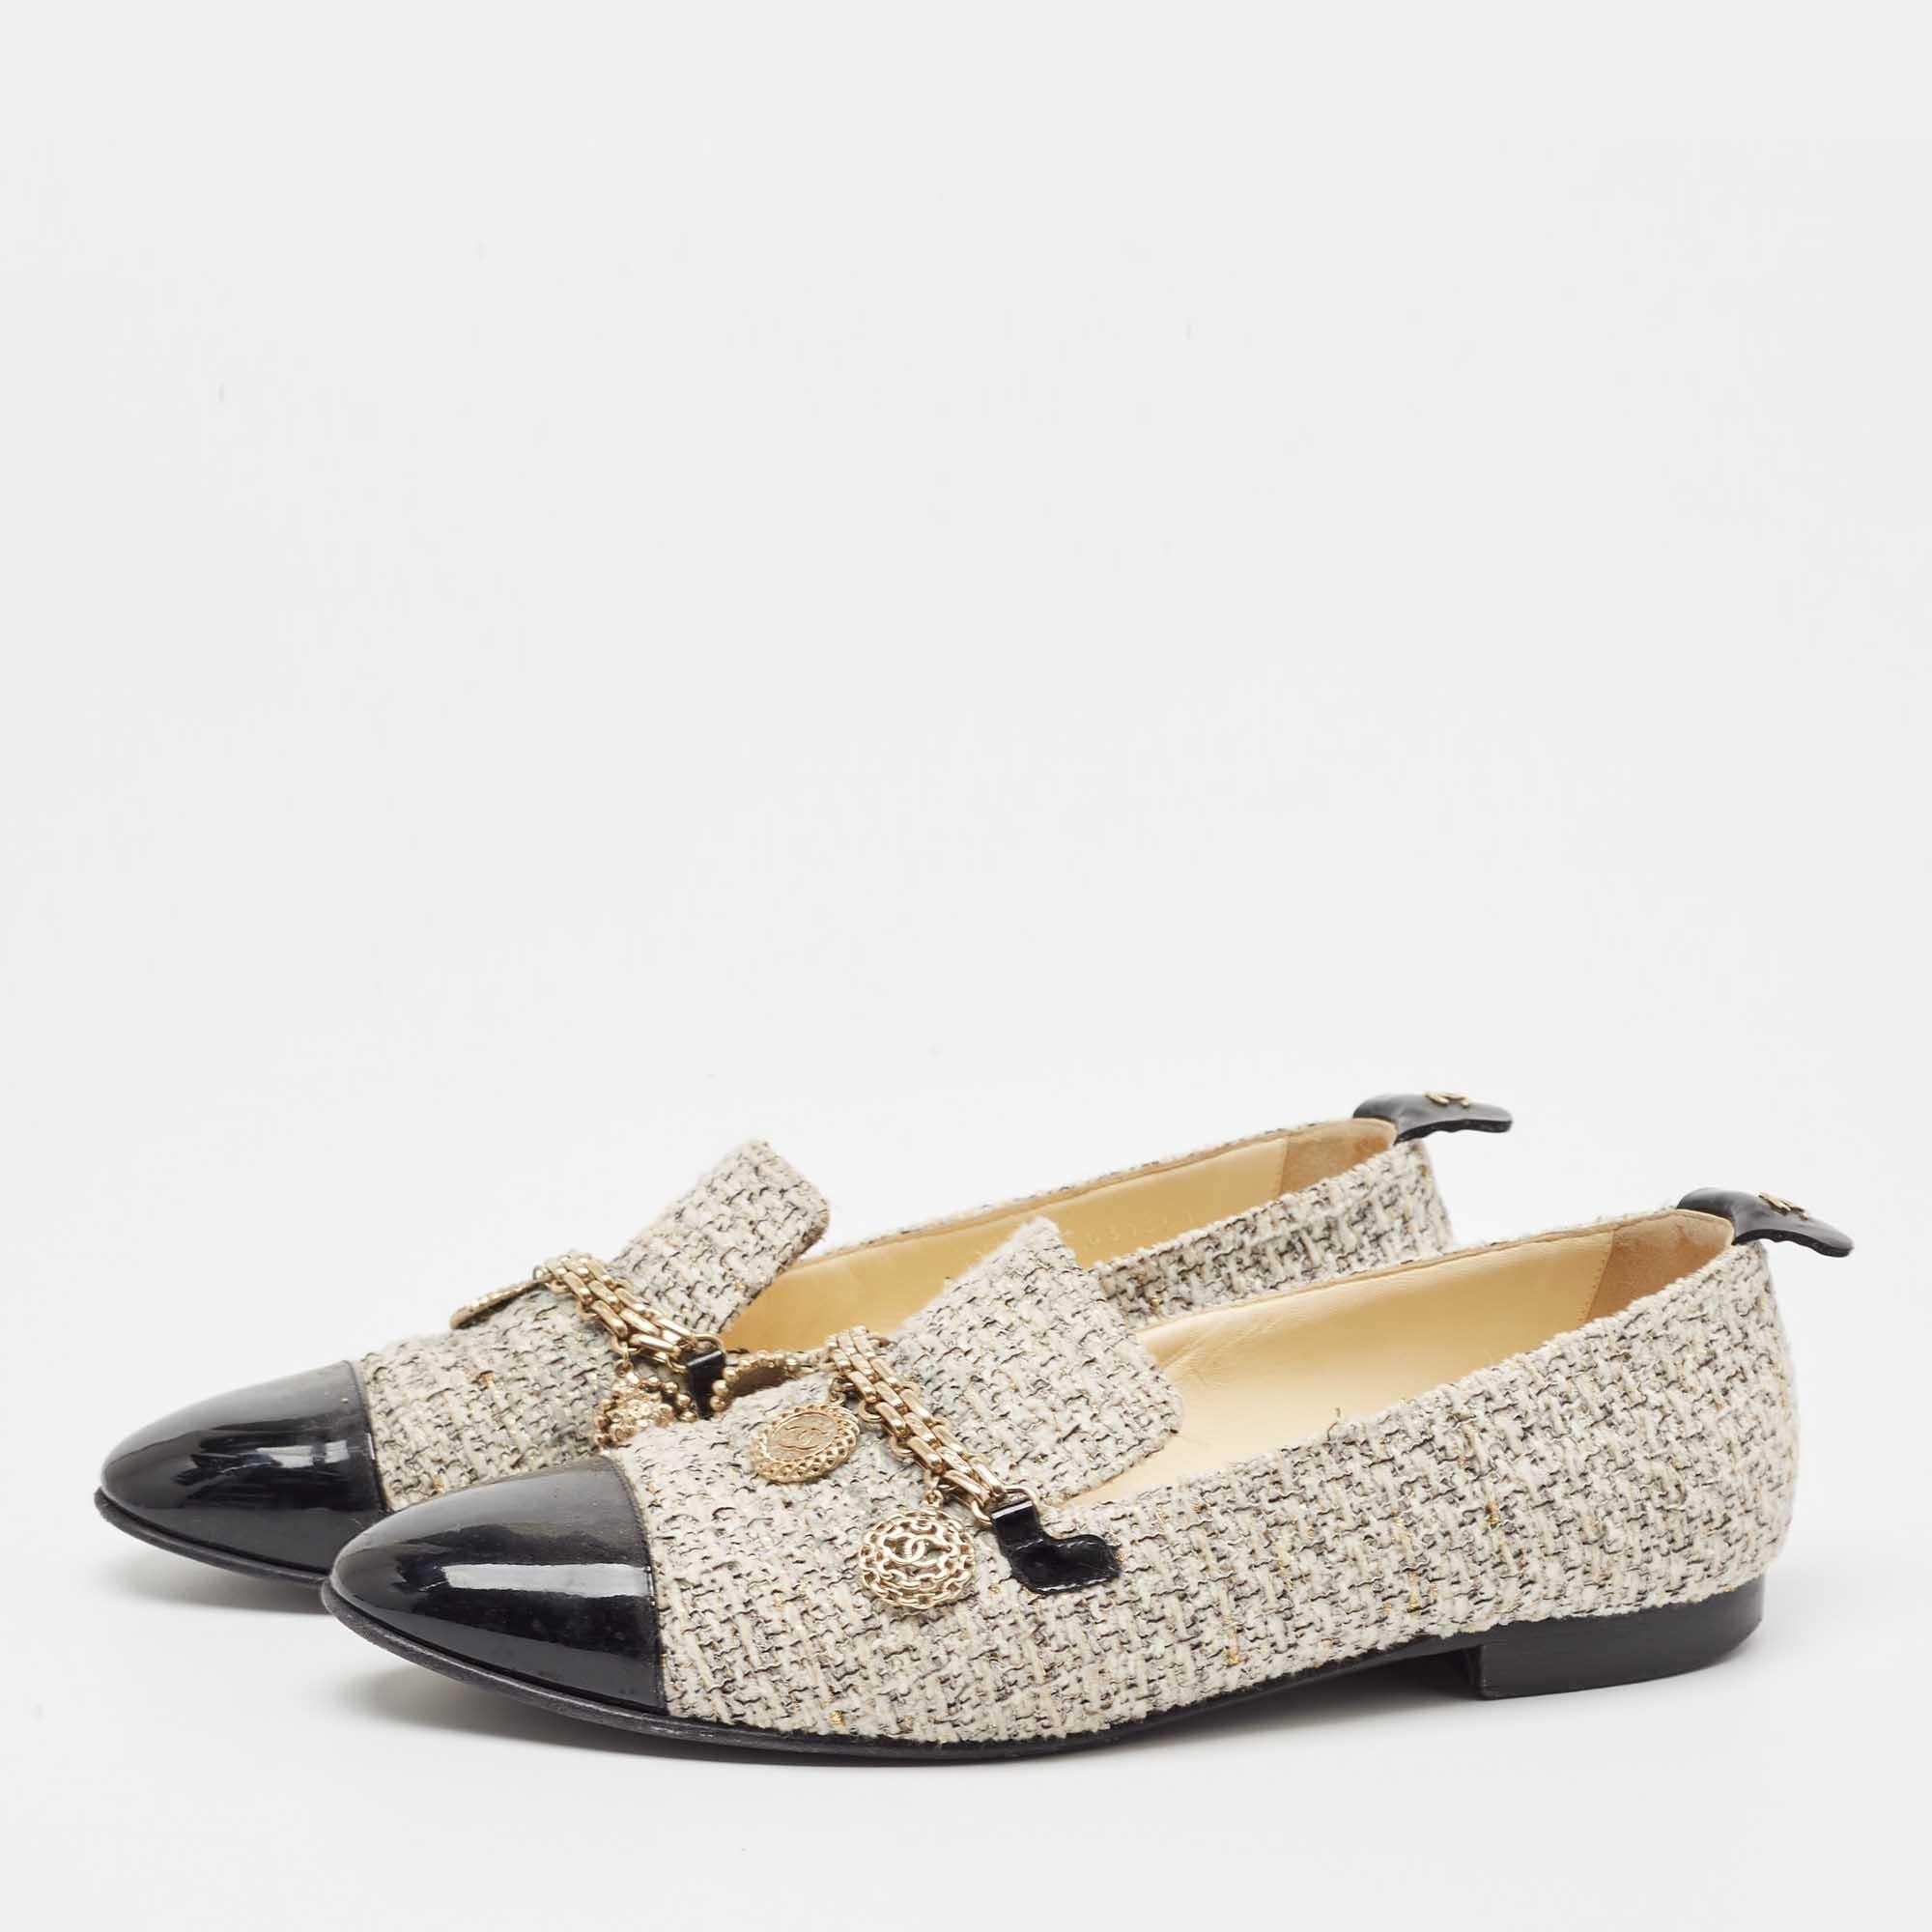 Chanel Beige/Black Tweed and Patent Chain-Link Loafers Size 37.5 4